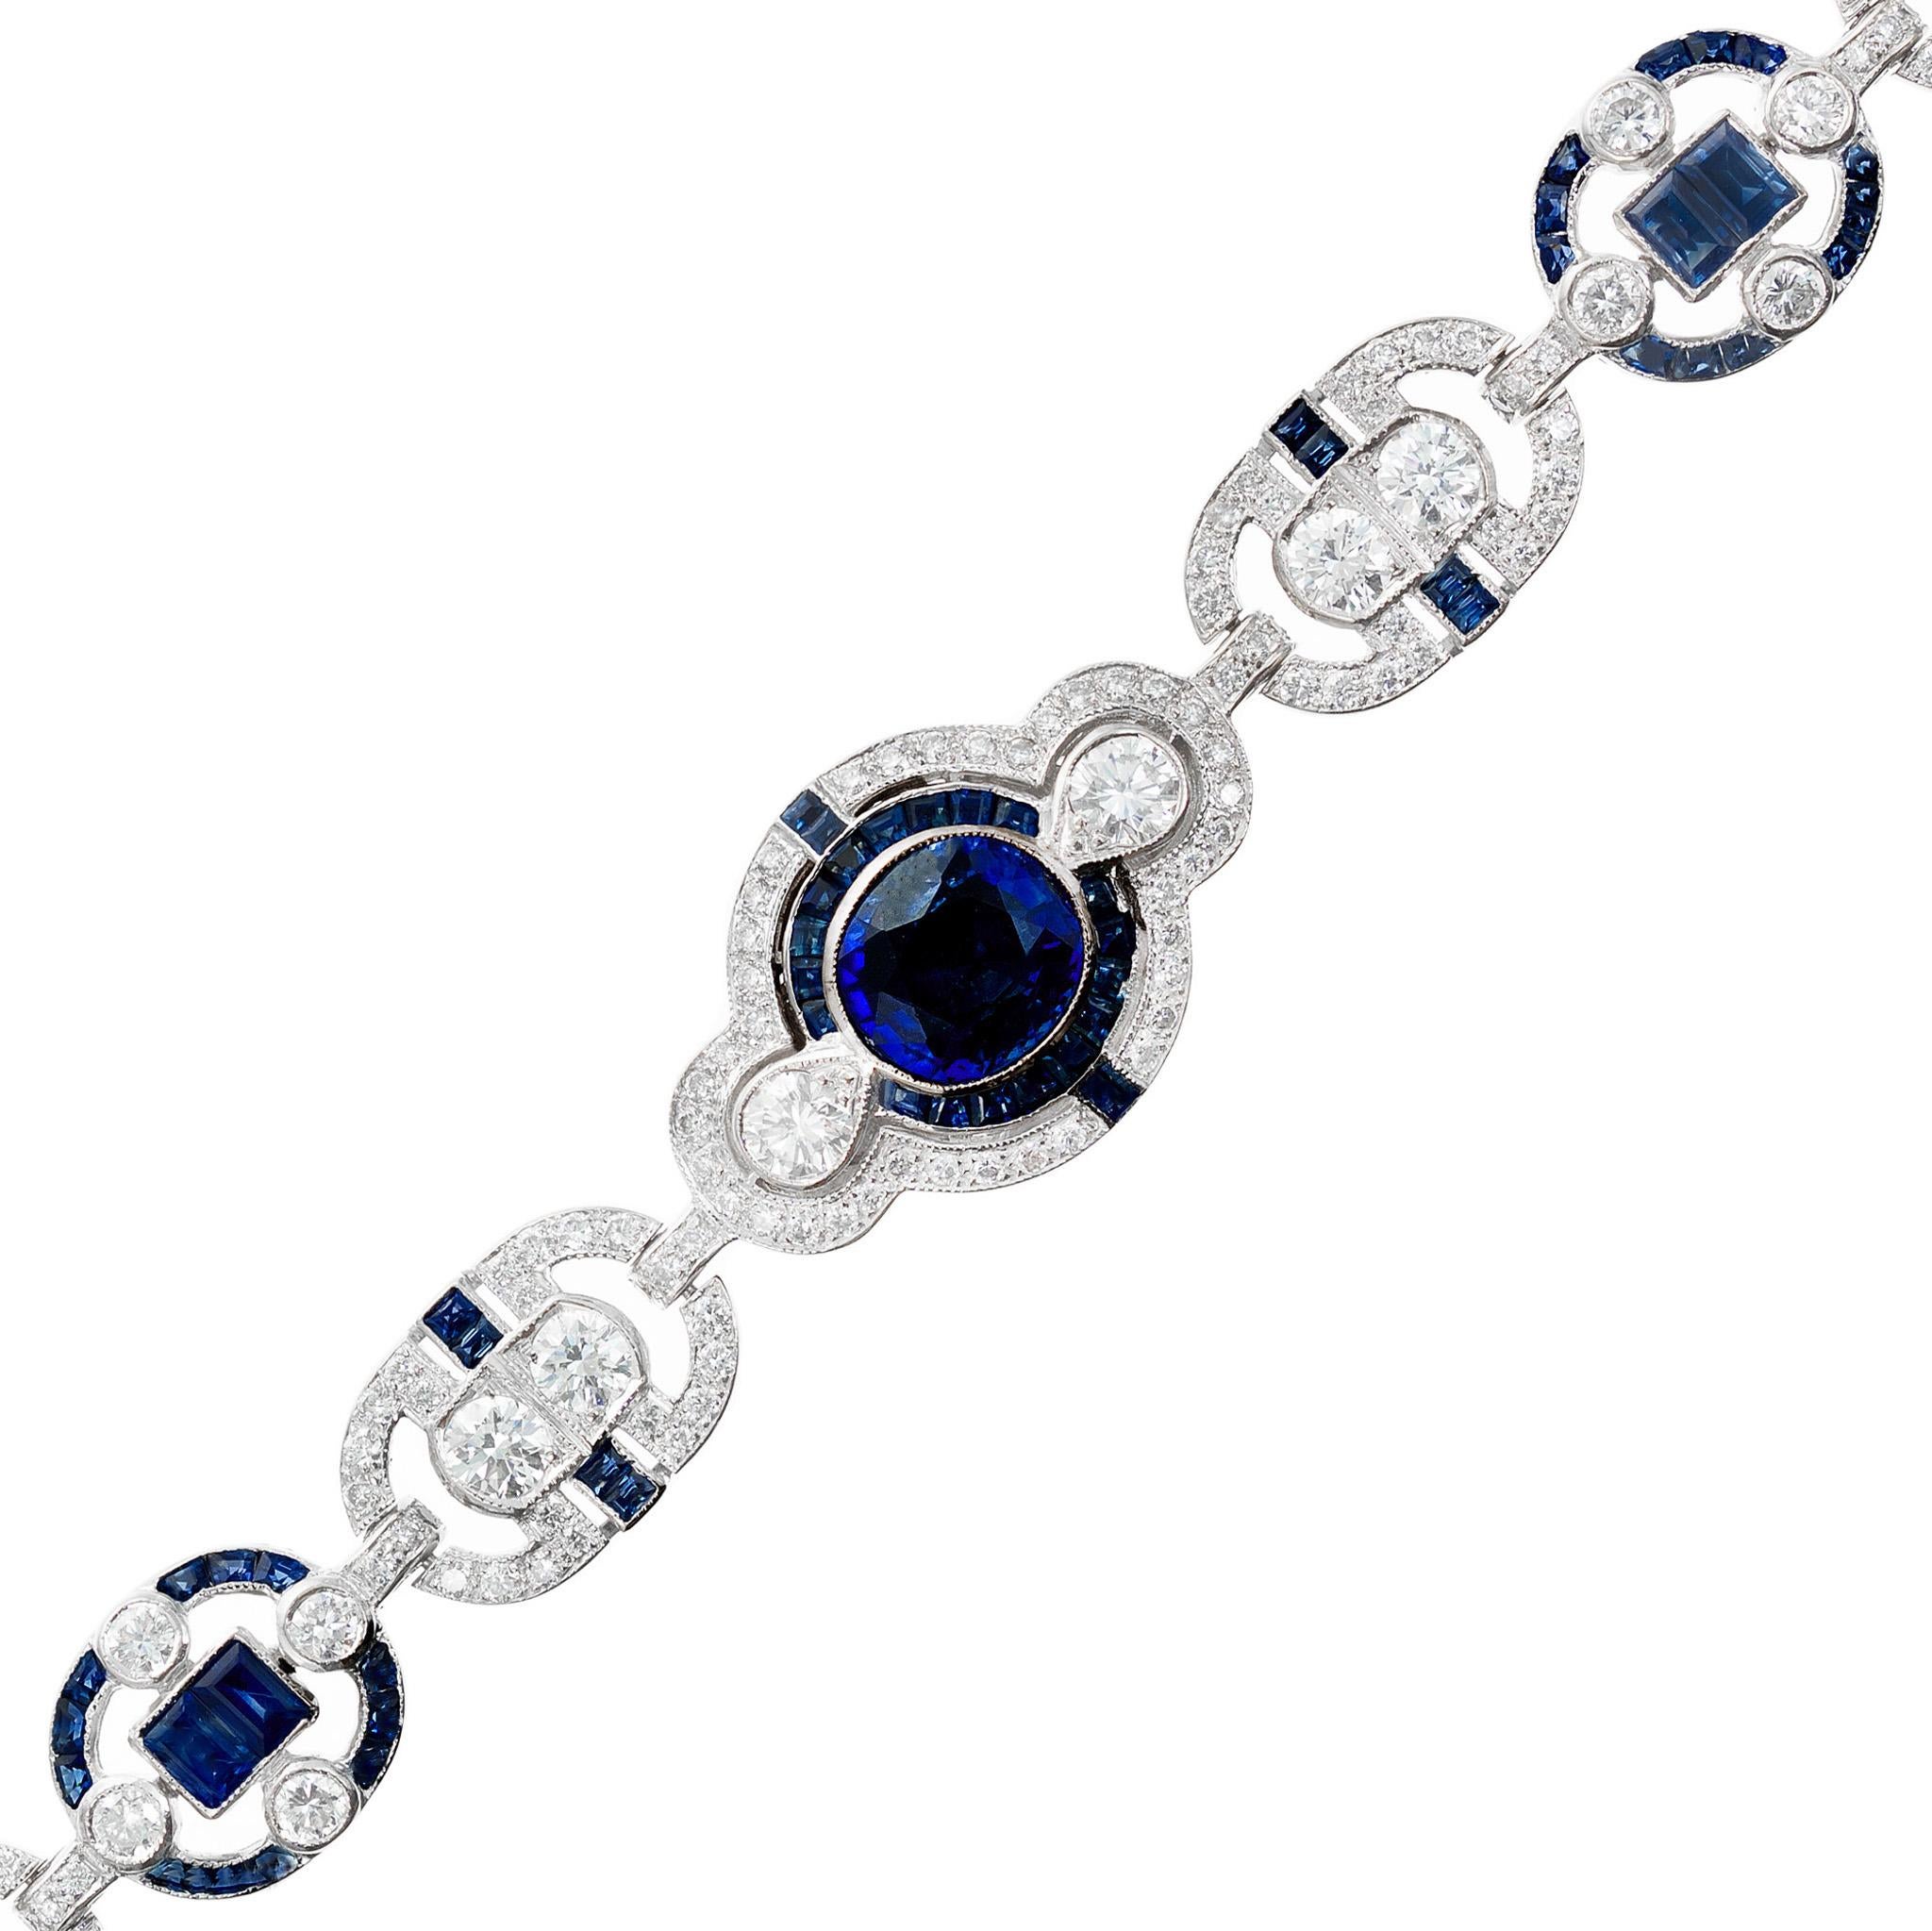 Absolutely stunning GIA Certified sapphire and diamond bracelet. This bracelet begins with a GIA certified, simple heat only, 2.00ct oval sapphire at the center and is accented by halos of baguette sapphires and round diamonds. A staggering 330